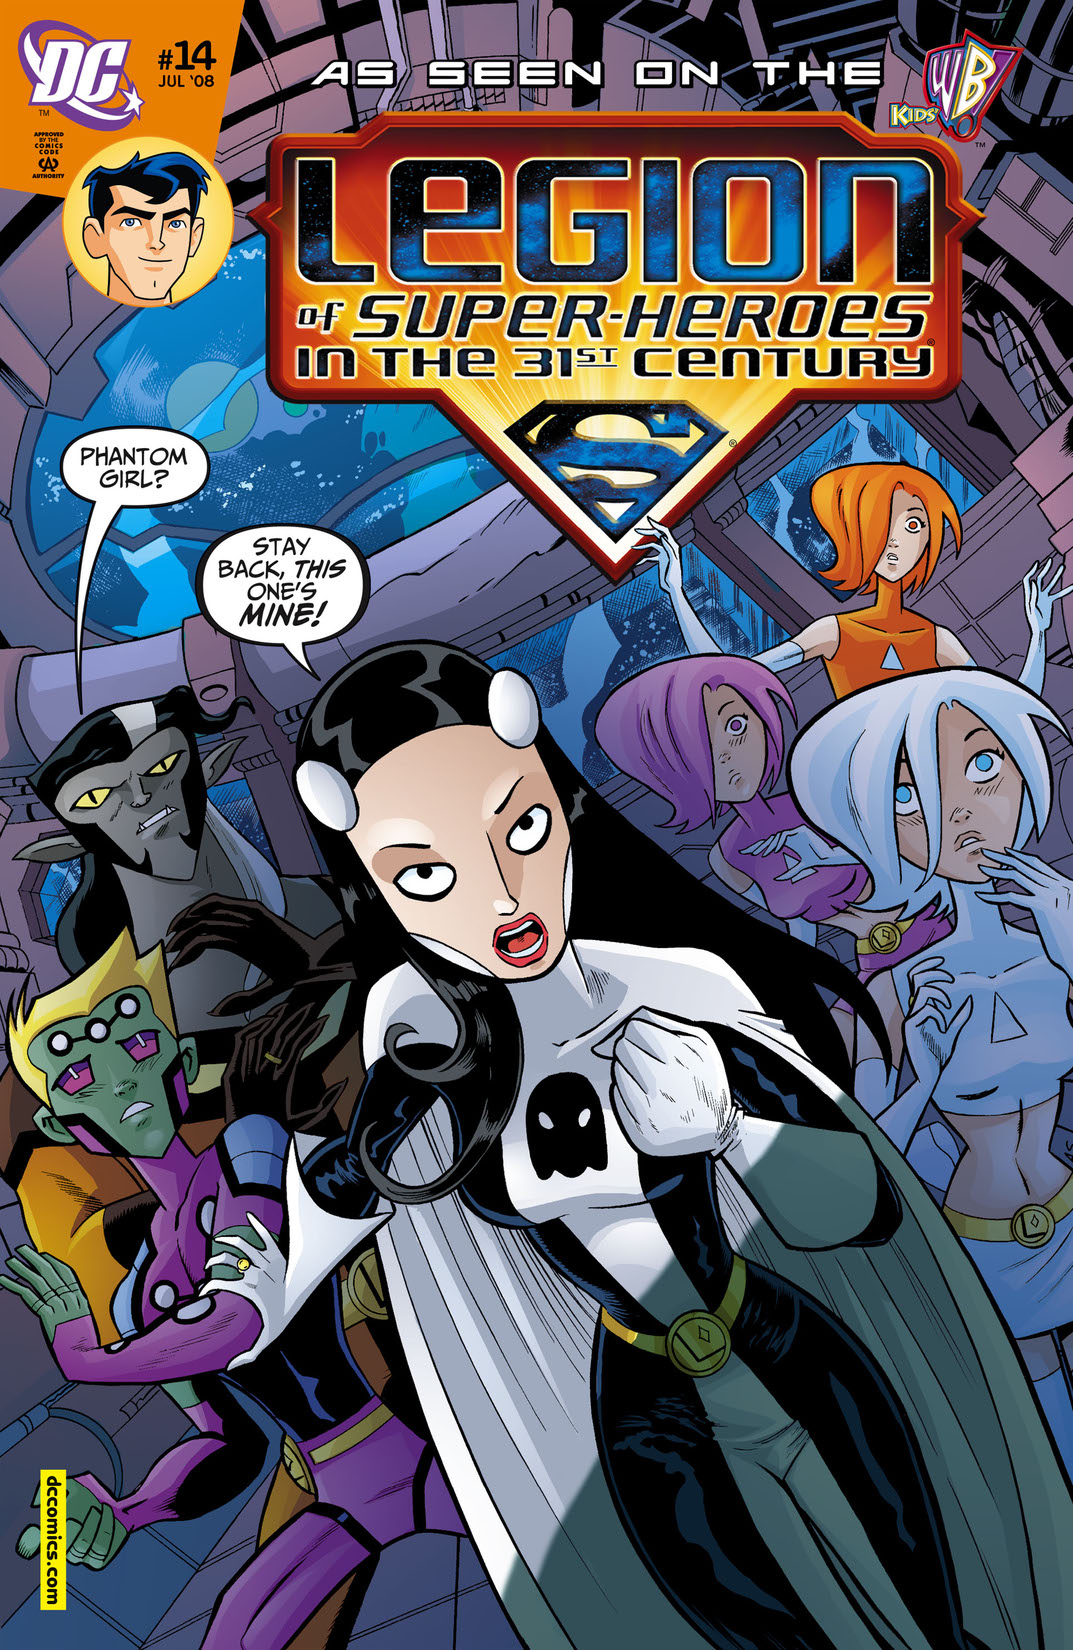 The Legion of Super-heroes in the 31st Century #14 preview images